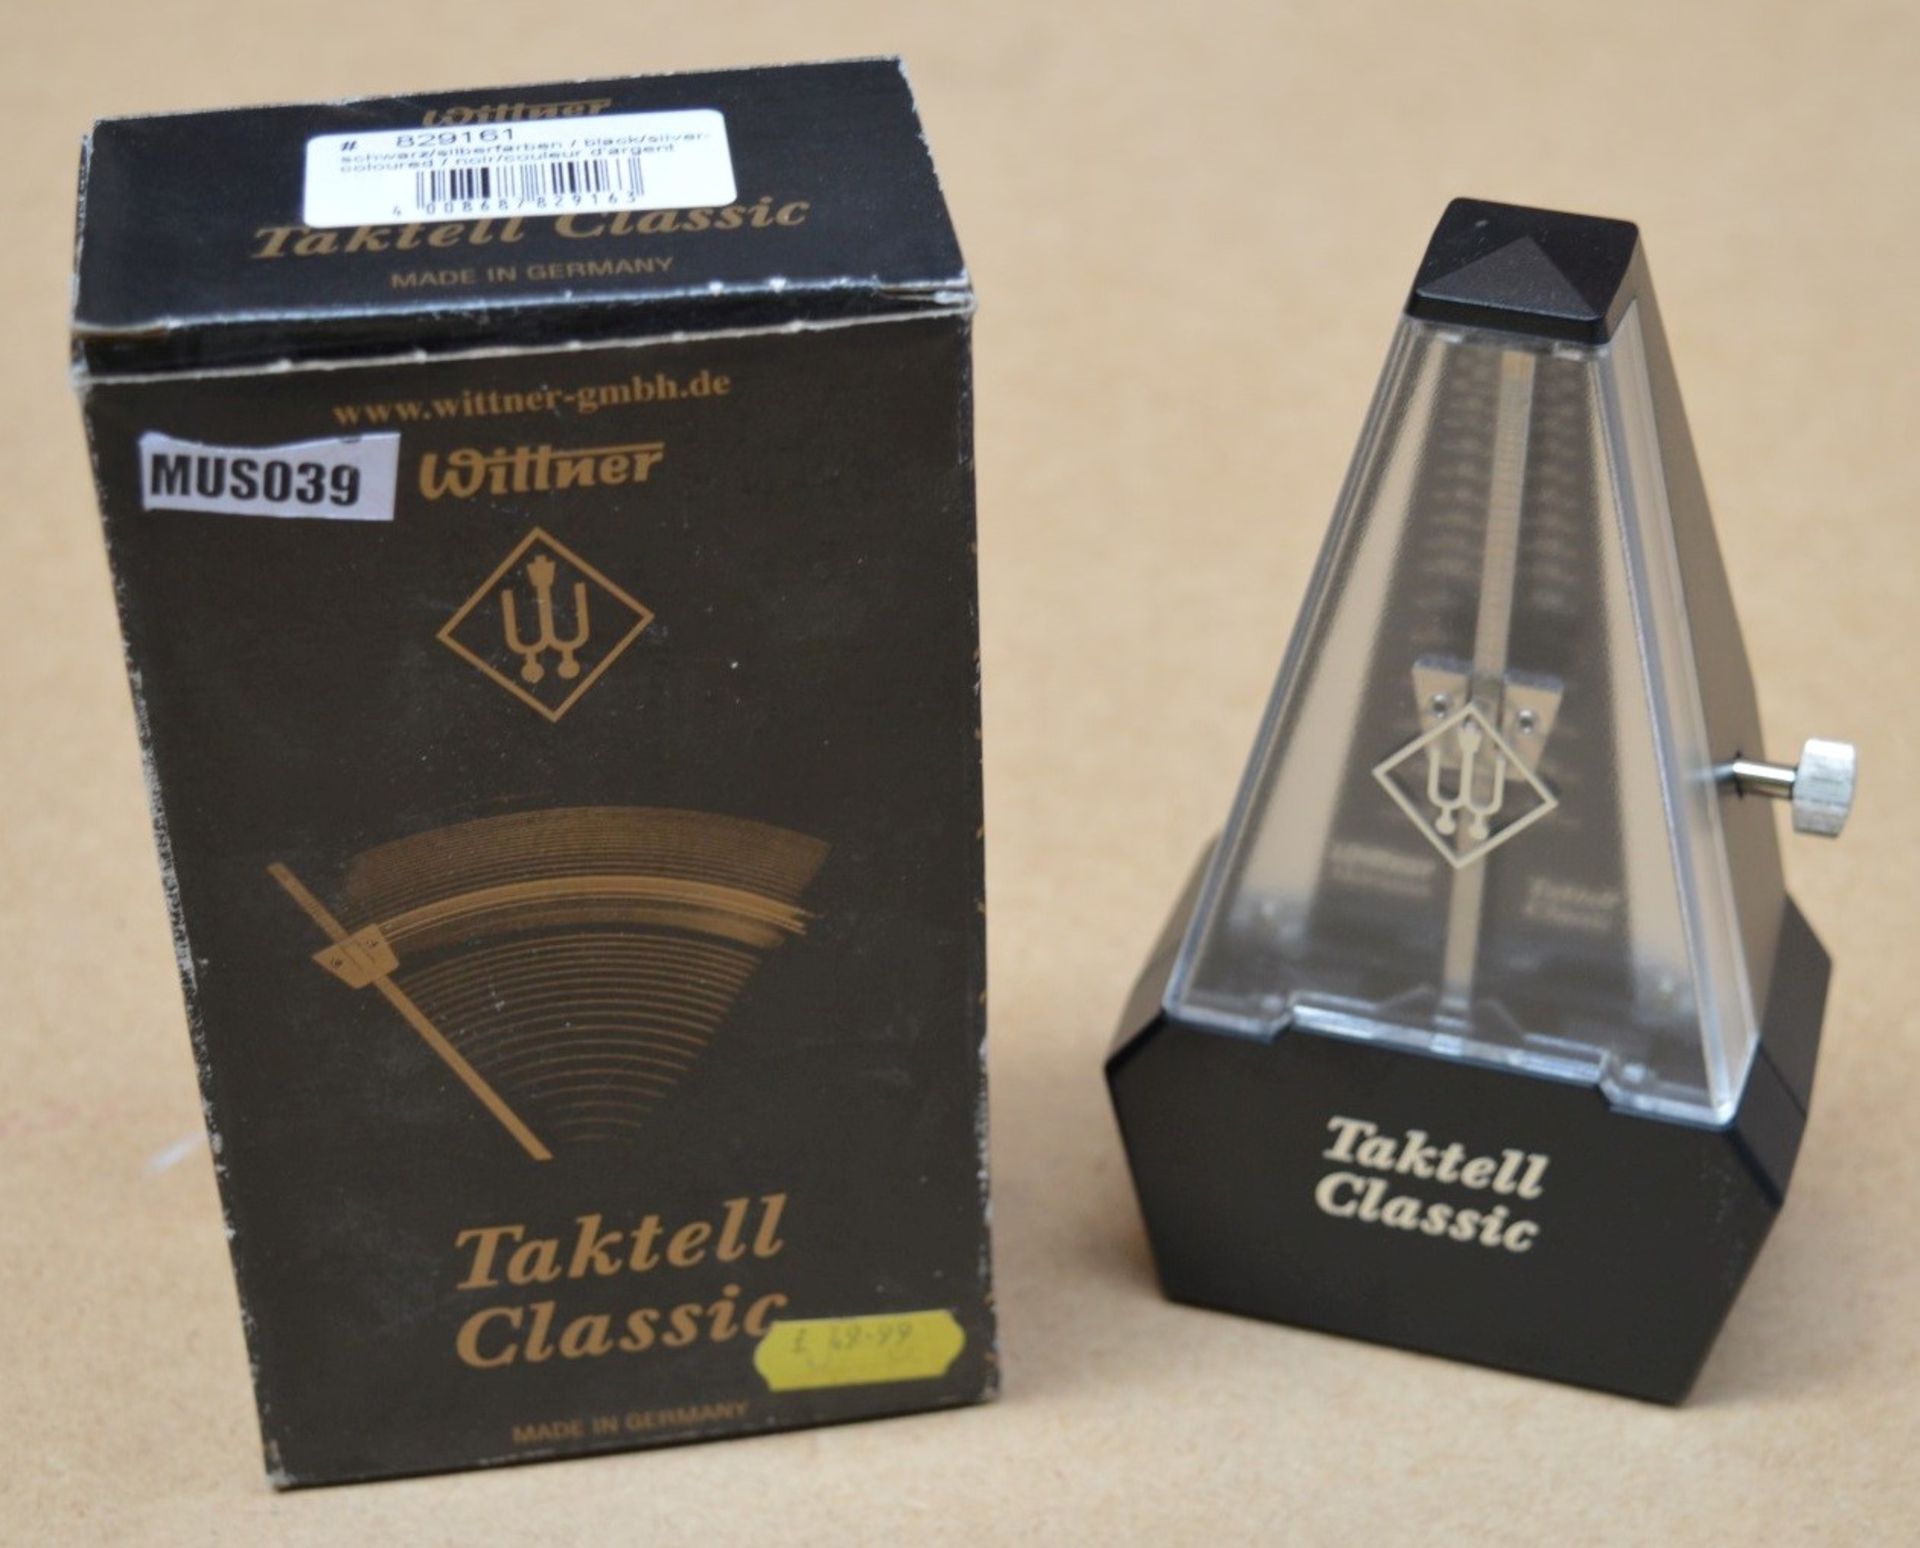 1 x Wittner Taktell Classic Black & Gold Metronome - CL020 - Ref Mus039 - Location: Altrincham